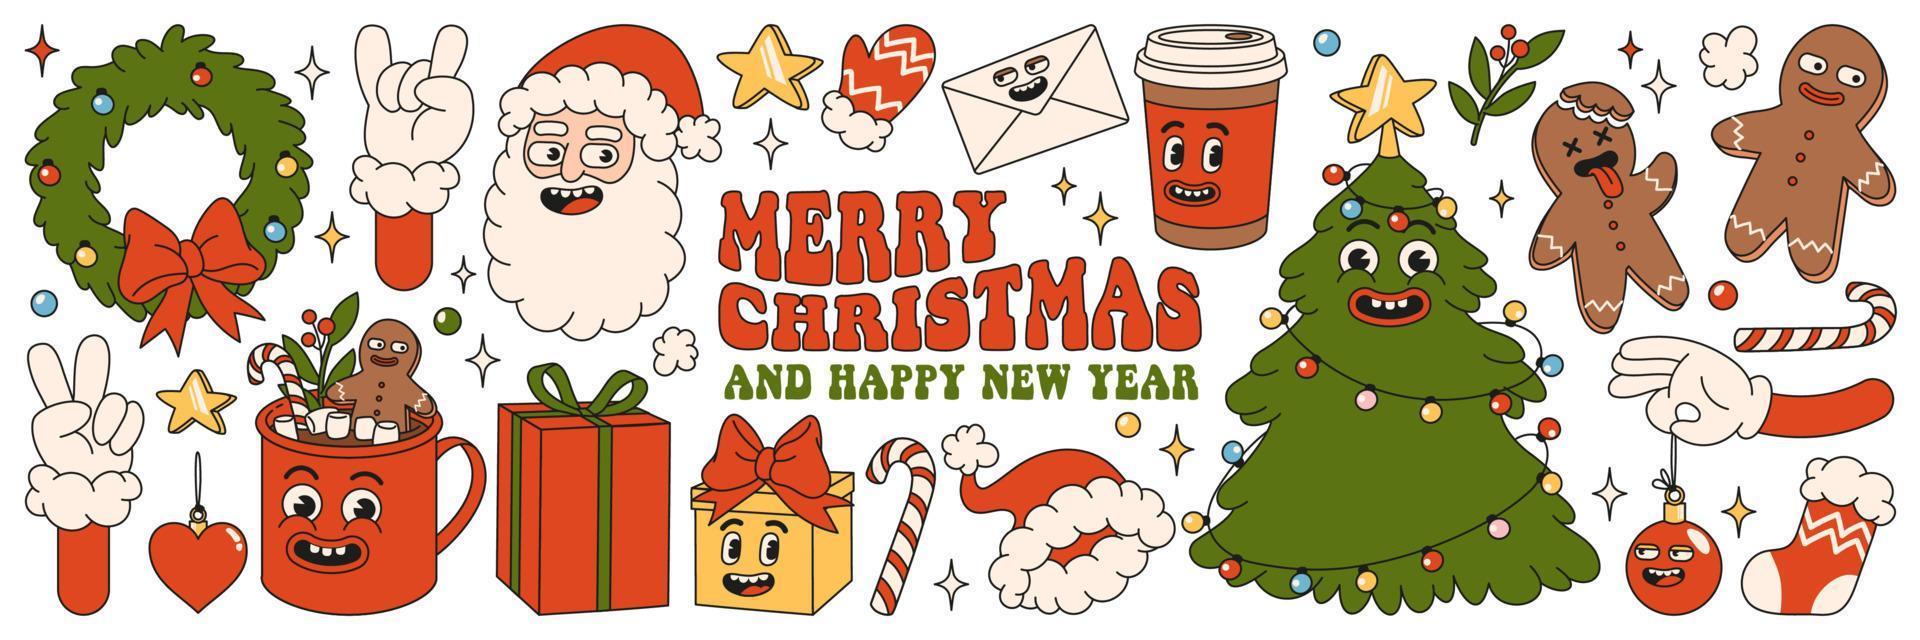 Merry Christmas. Santa, tree, gifts, cocoa, coffee, gingerbread in trendy retro cartoon style. vector